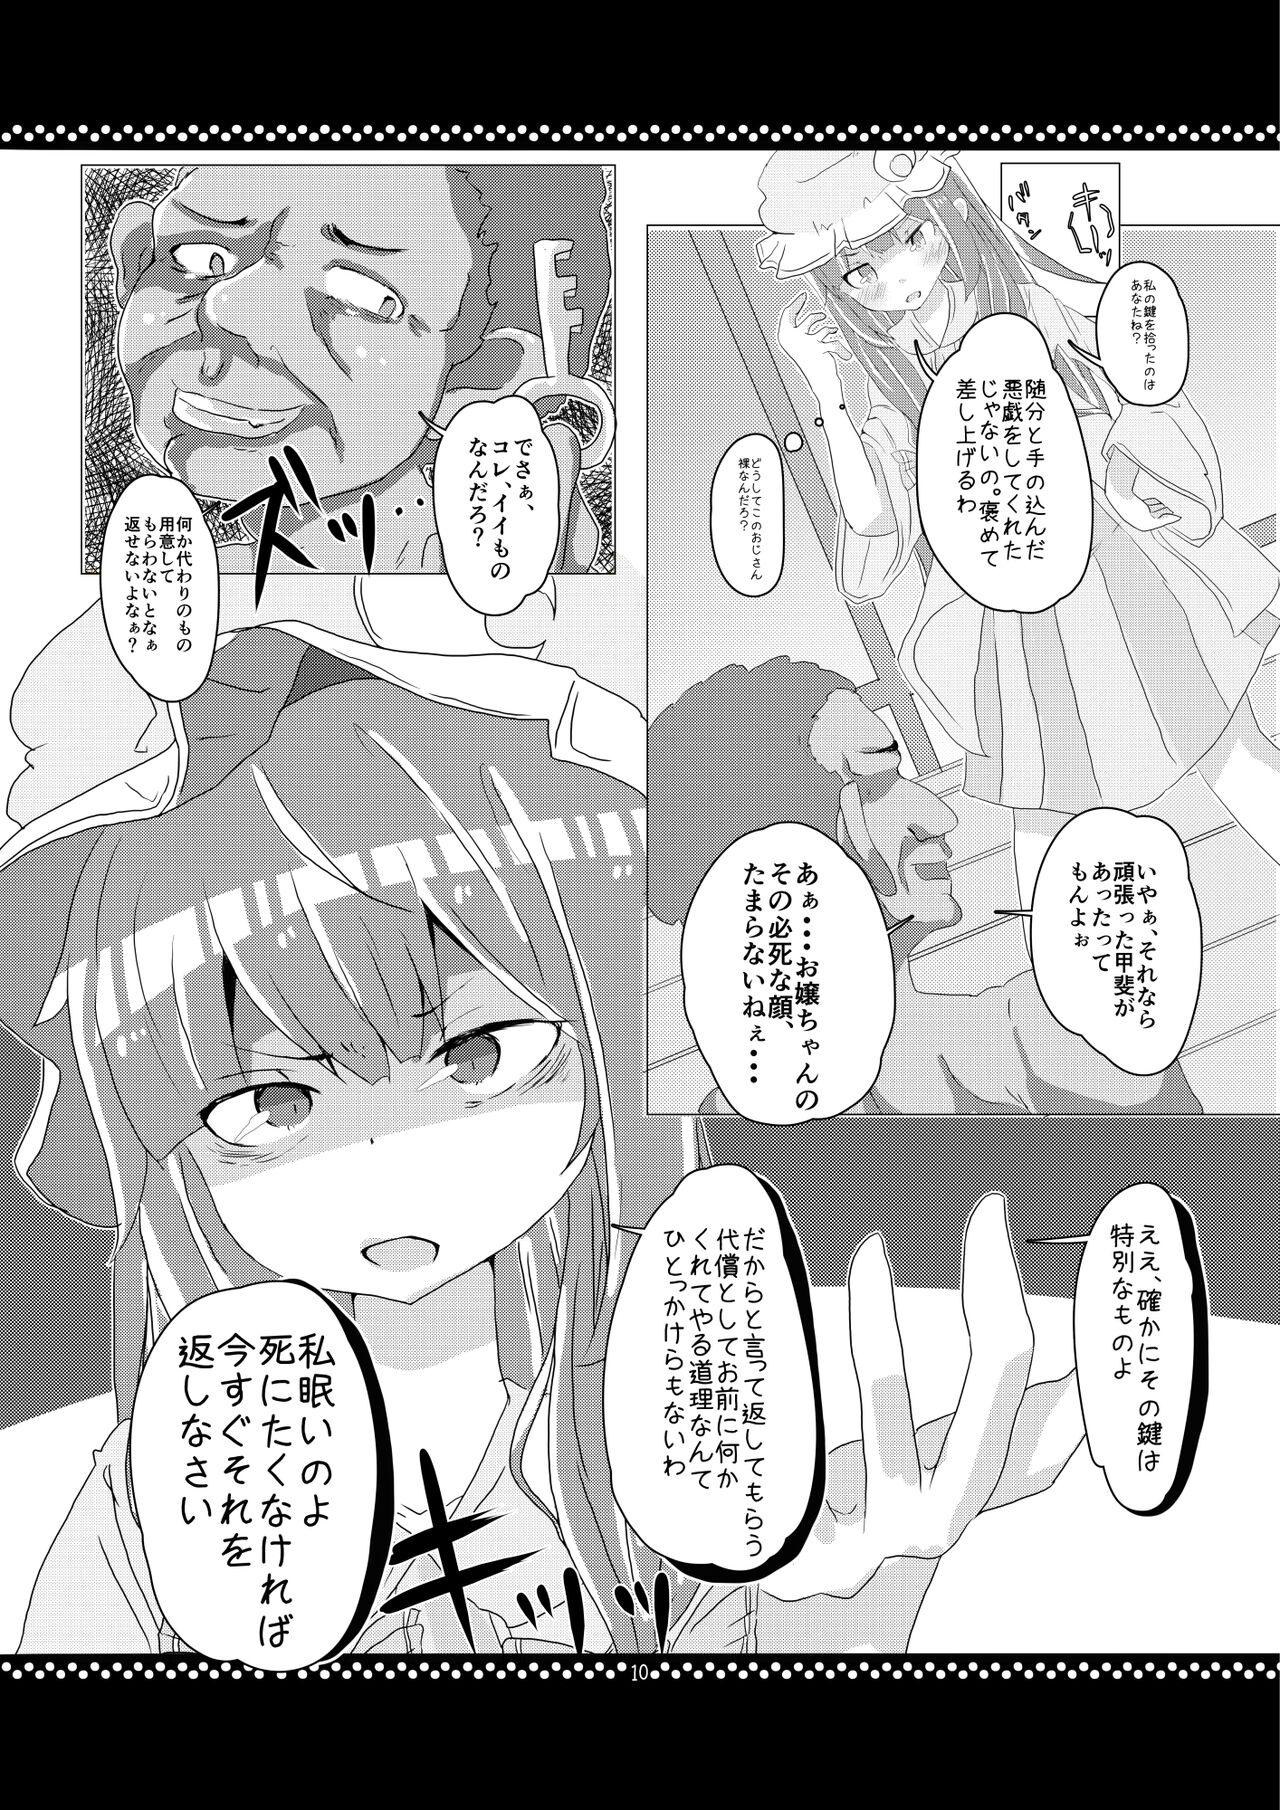 Leaked 従順？パチュリーさま！ - Touhou project Amateur Asian - Page 9